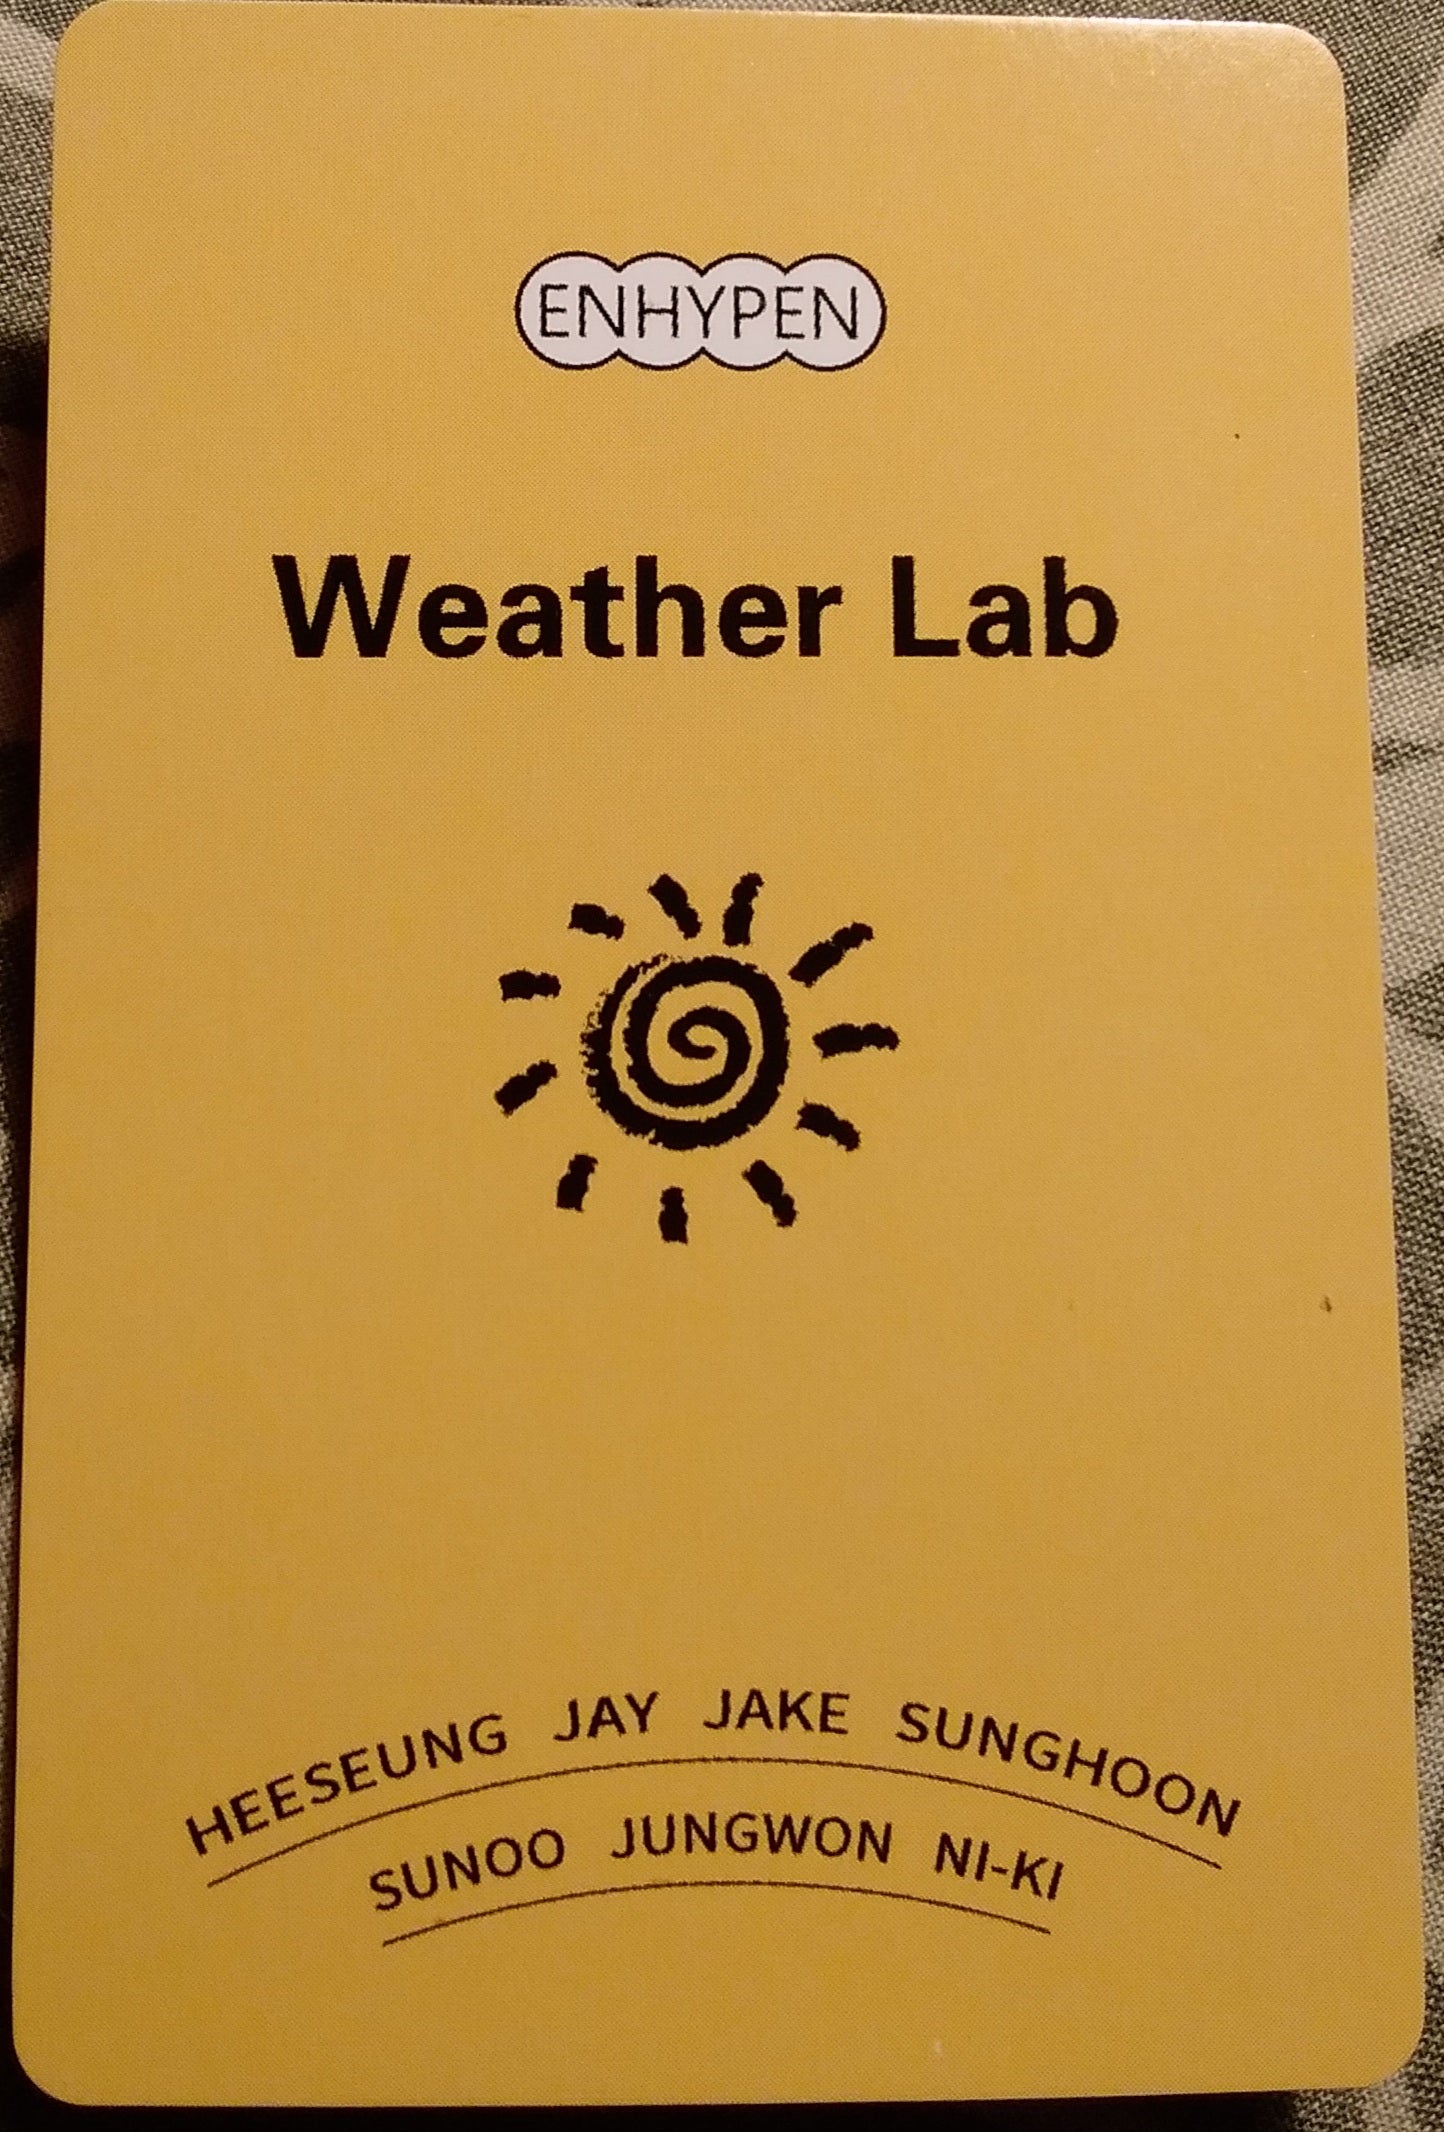 Photocard  ENHYPEN  Weather lab  Sunoo